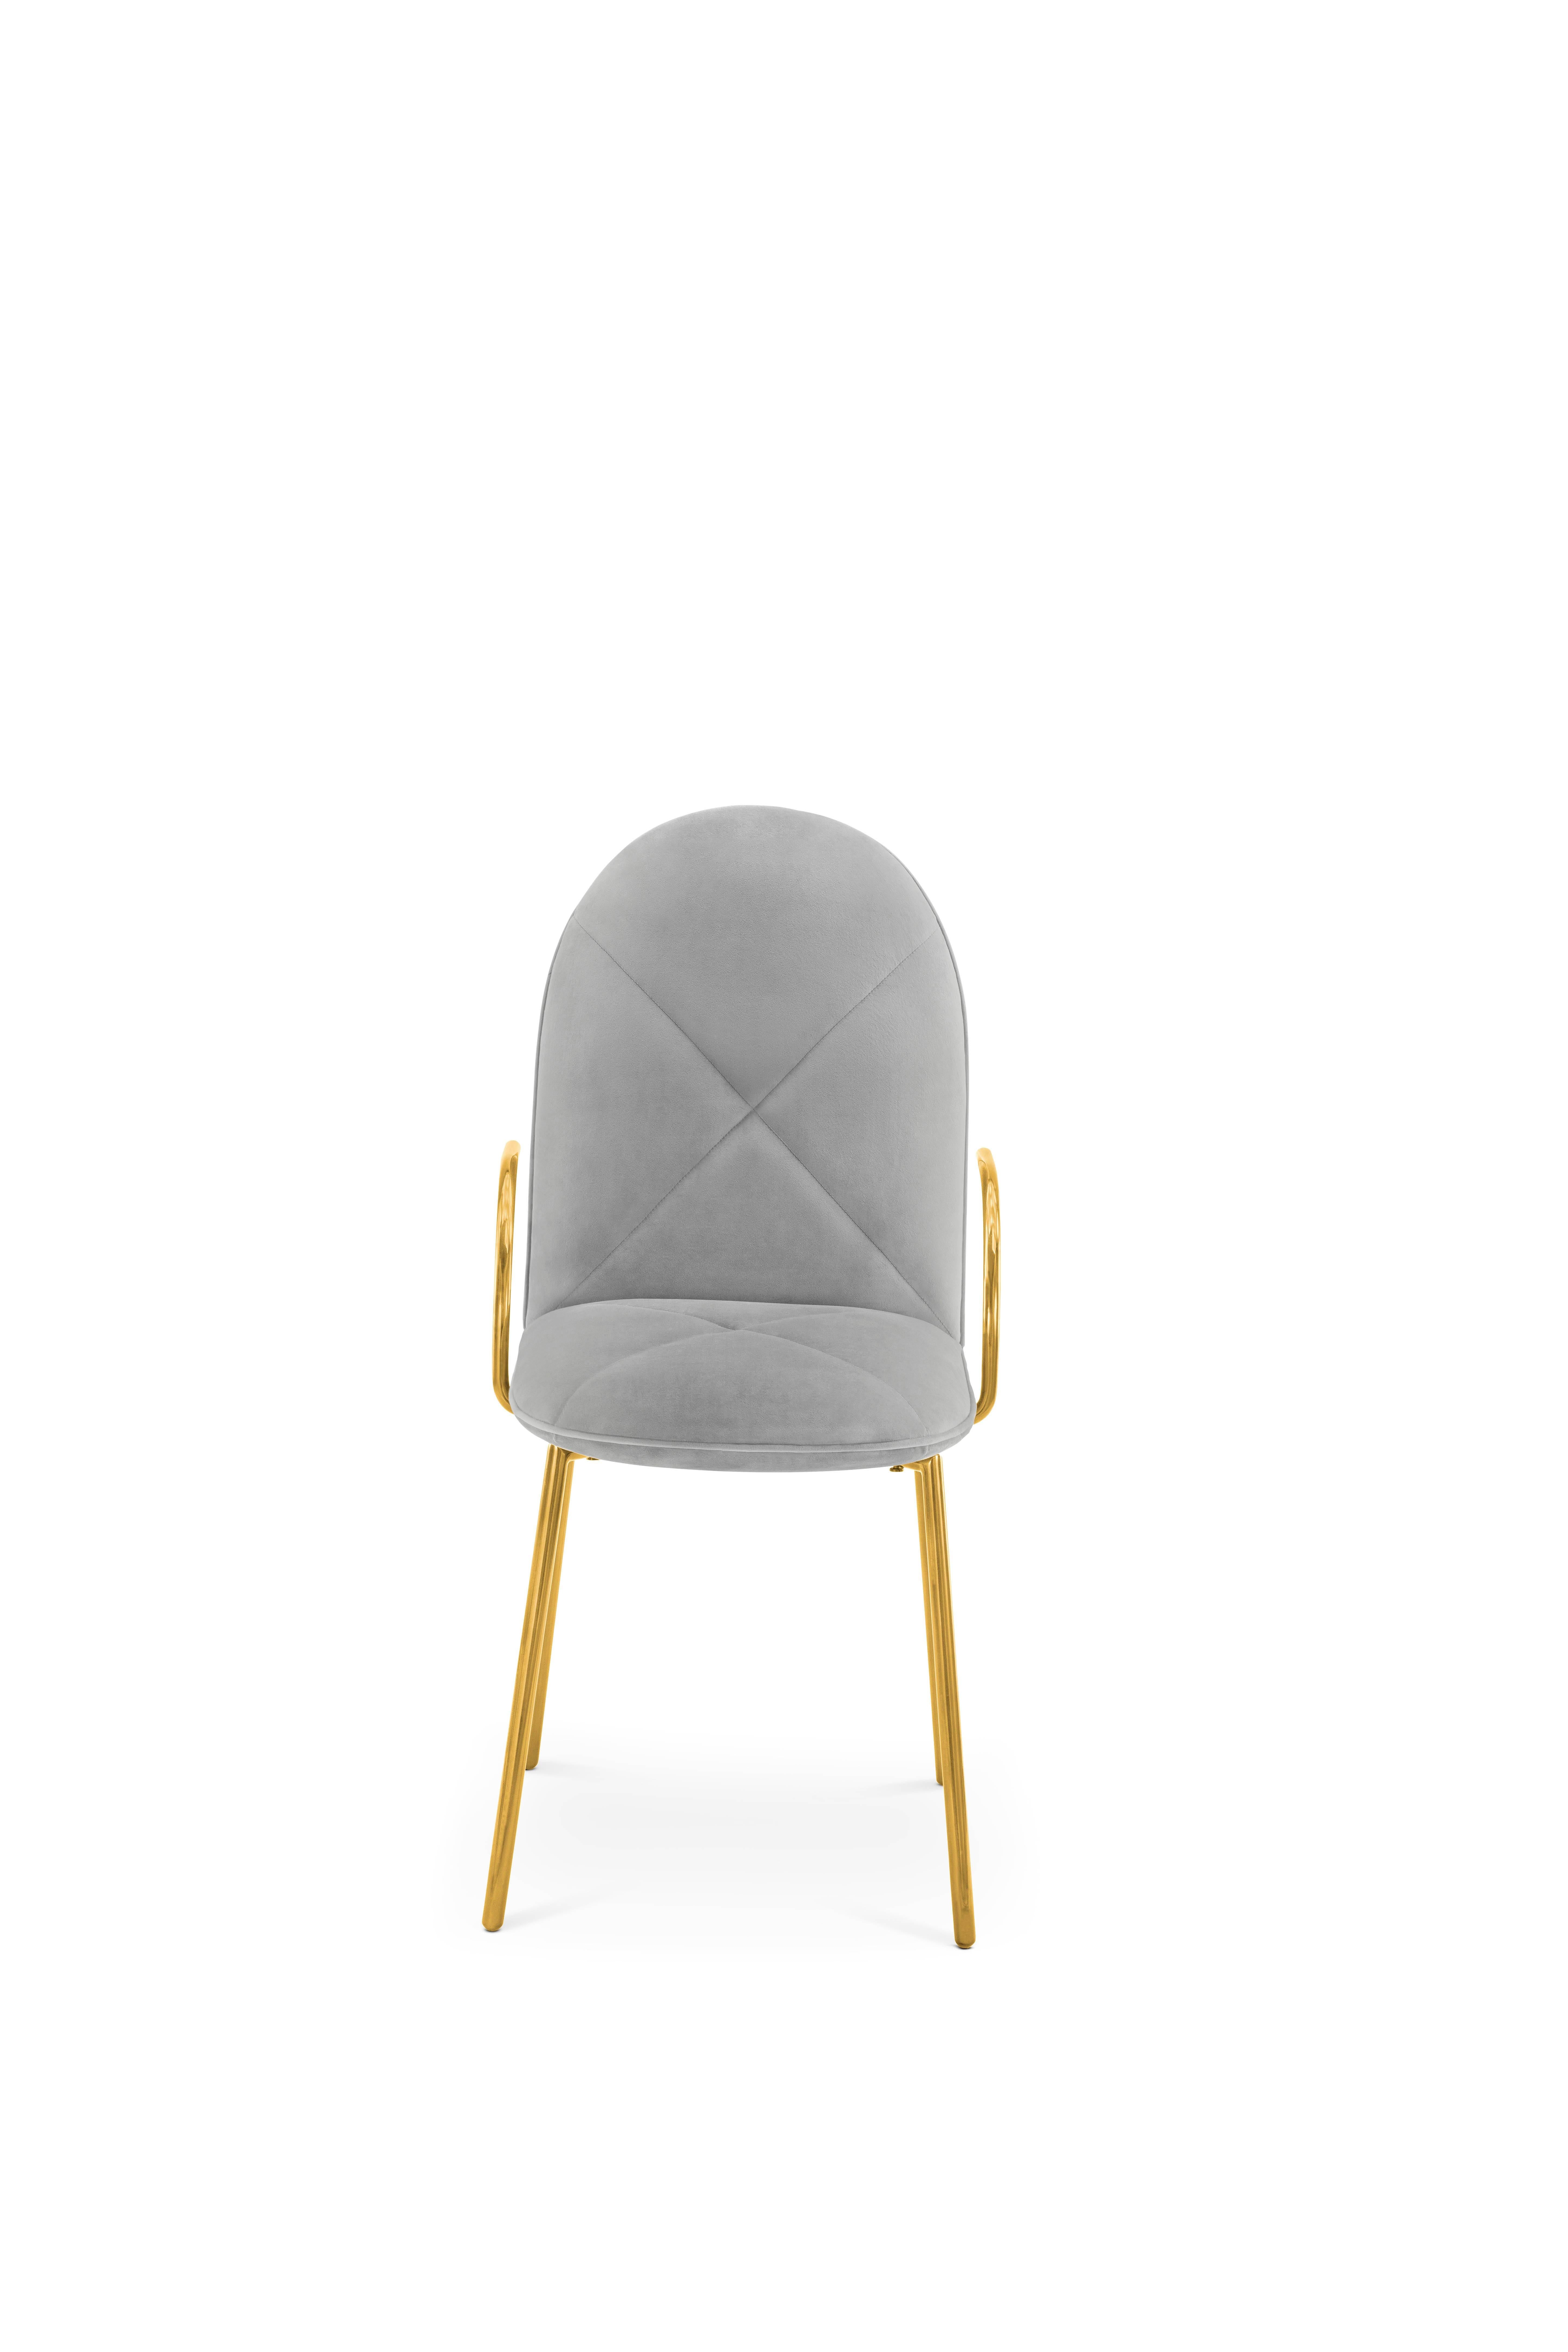 Orion Chair Grey by Nika Zupanc for Scarlet Splendour

The 88 constellations of the universe mysterious and magical, holding a promise to guide our destinies. Little wonder that they are the muse for the 88 Secrets, Nika Zupanc’s debut collection of